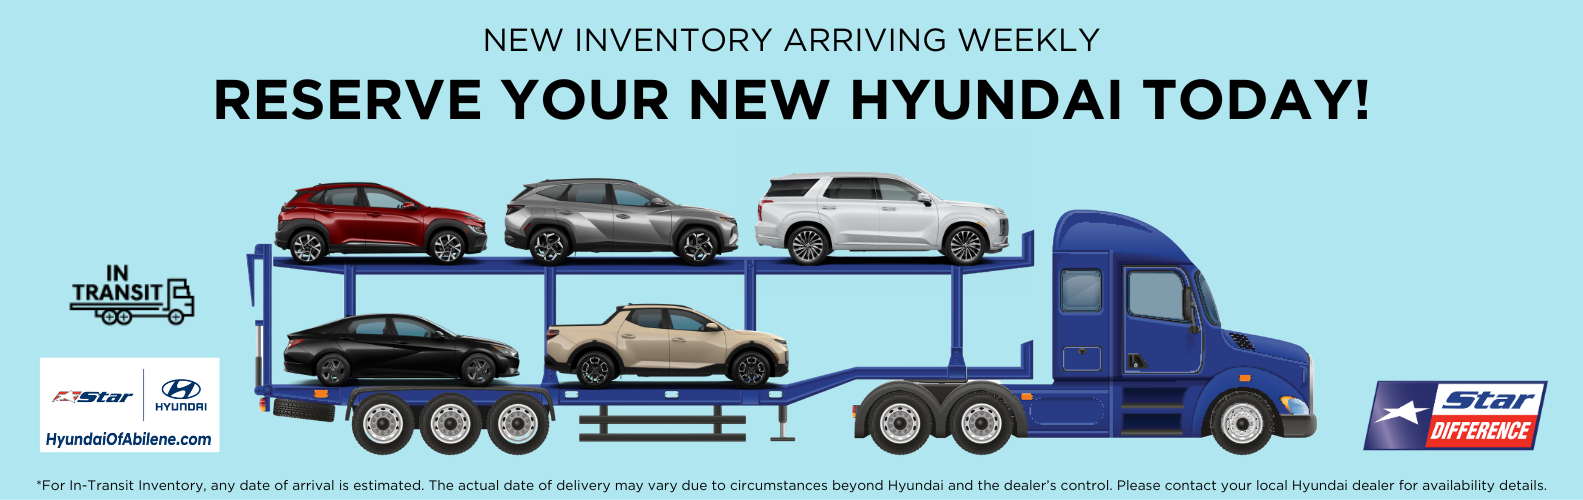 Reserve Your New Hyundai Today!